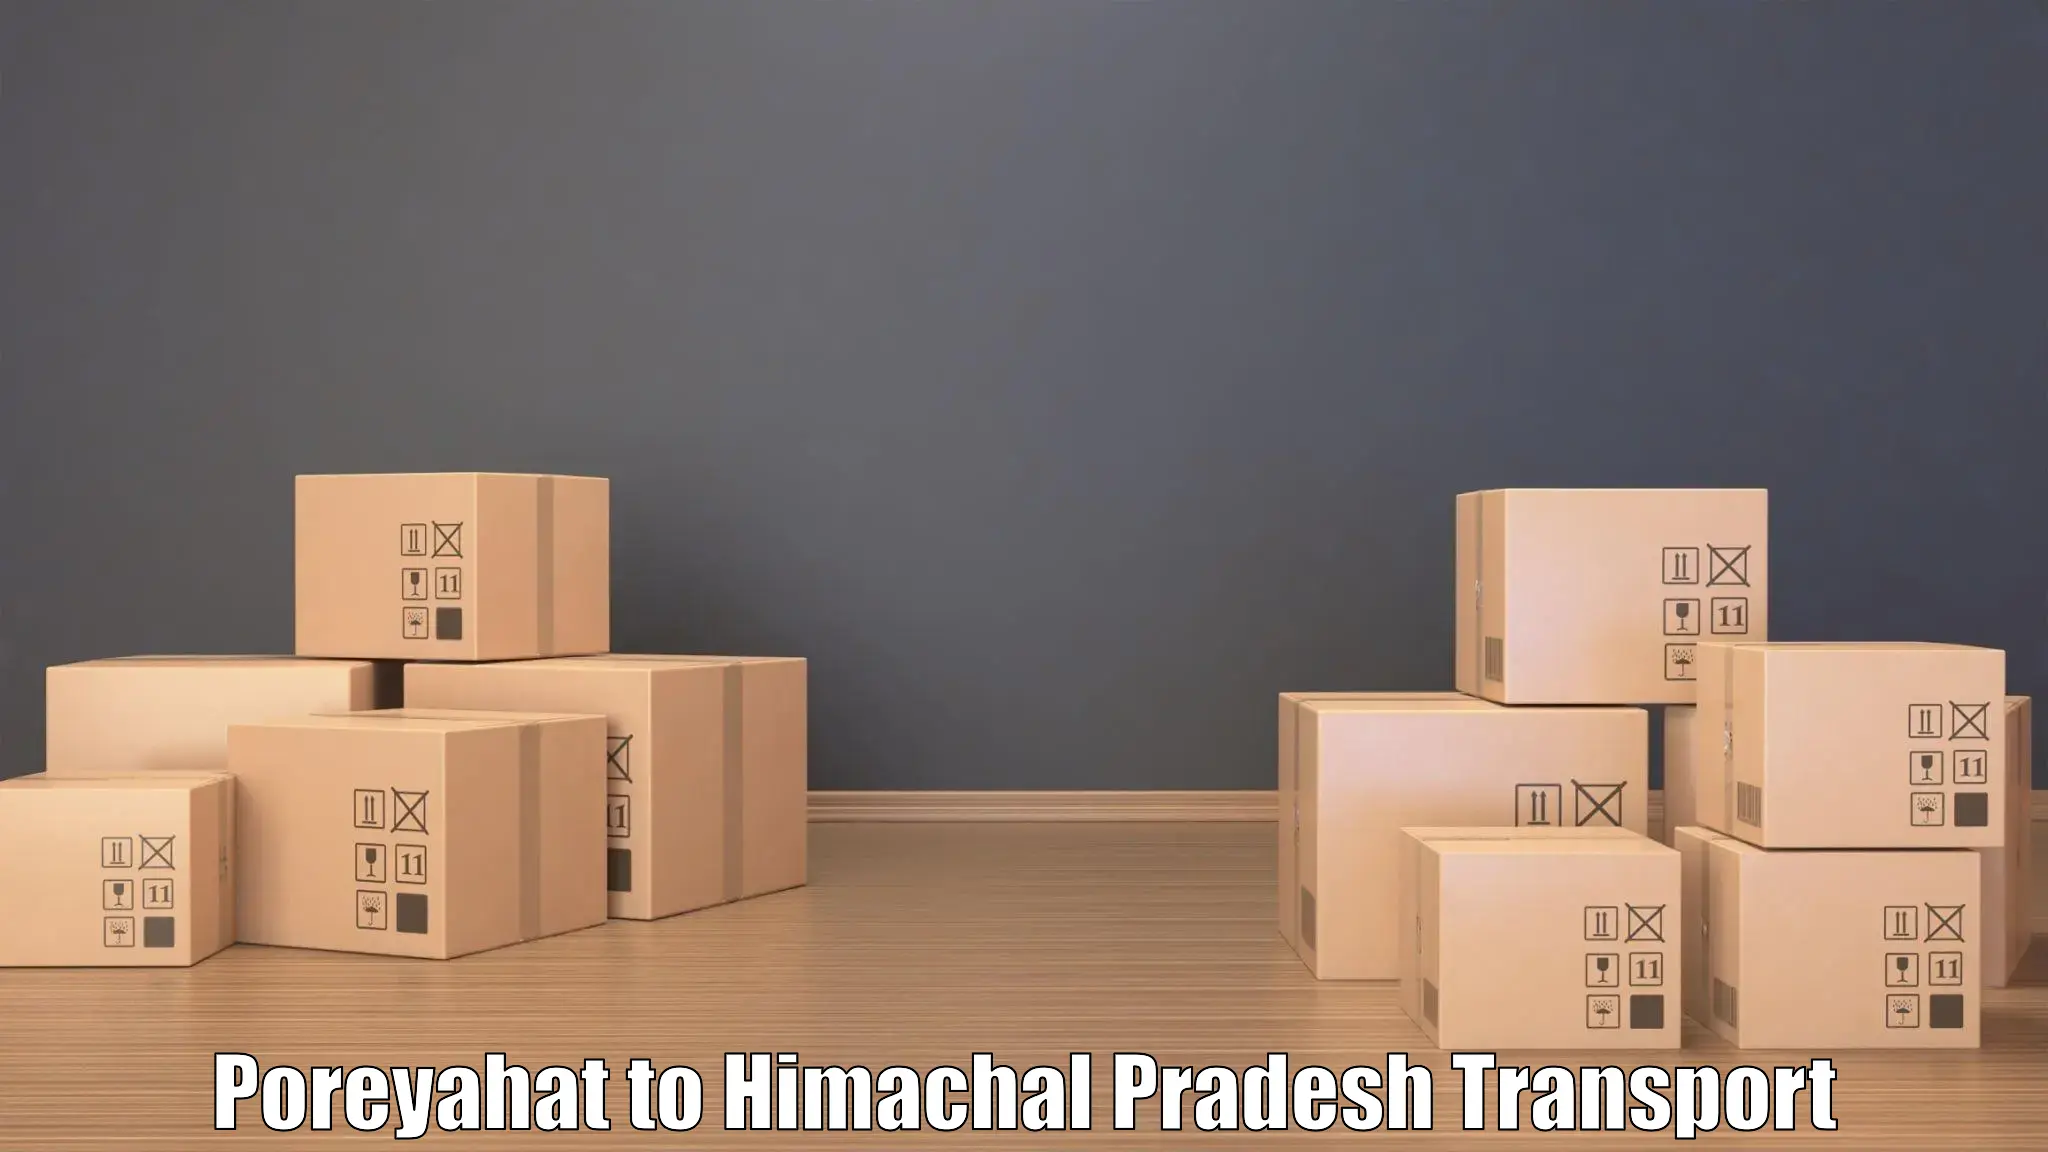 Air freight transport services Poreyahat to Darlaghat